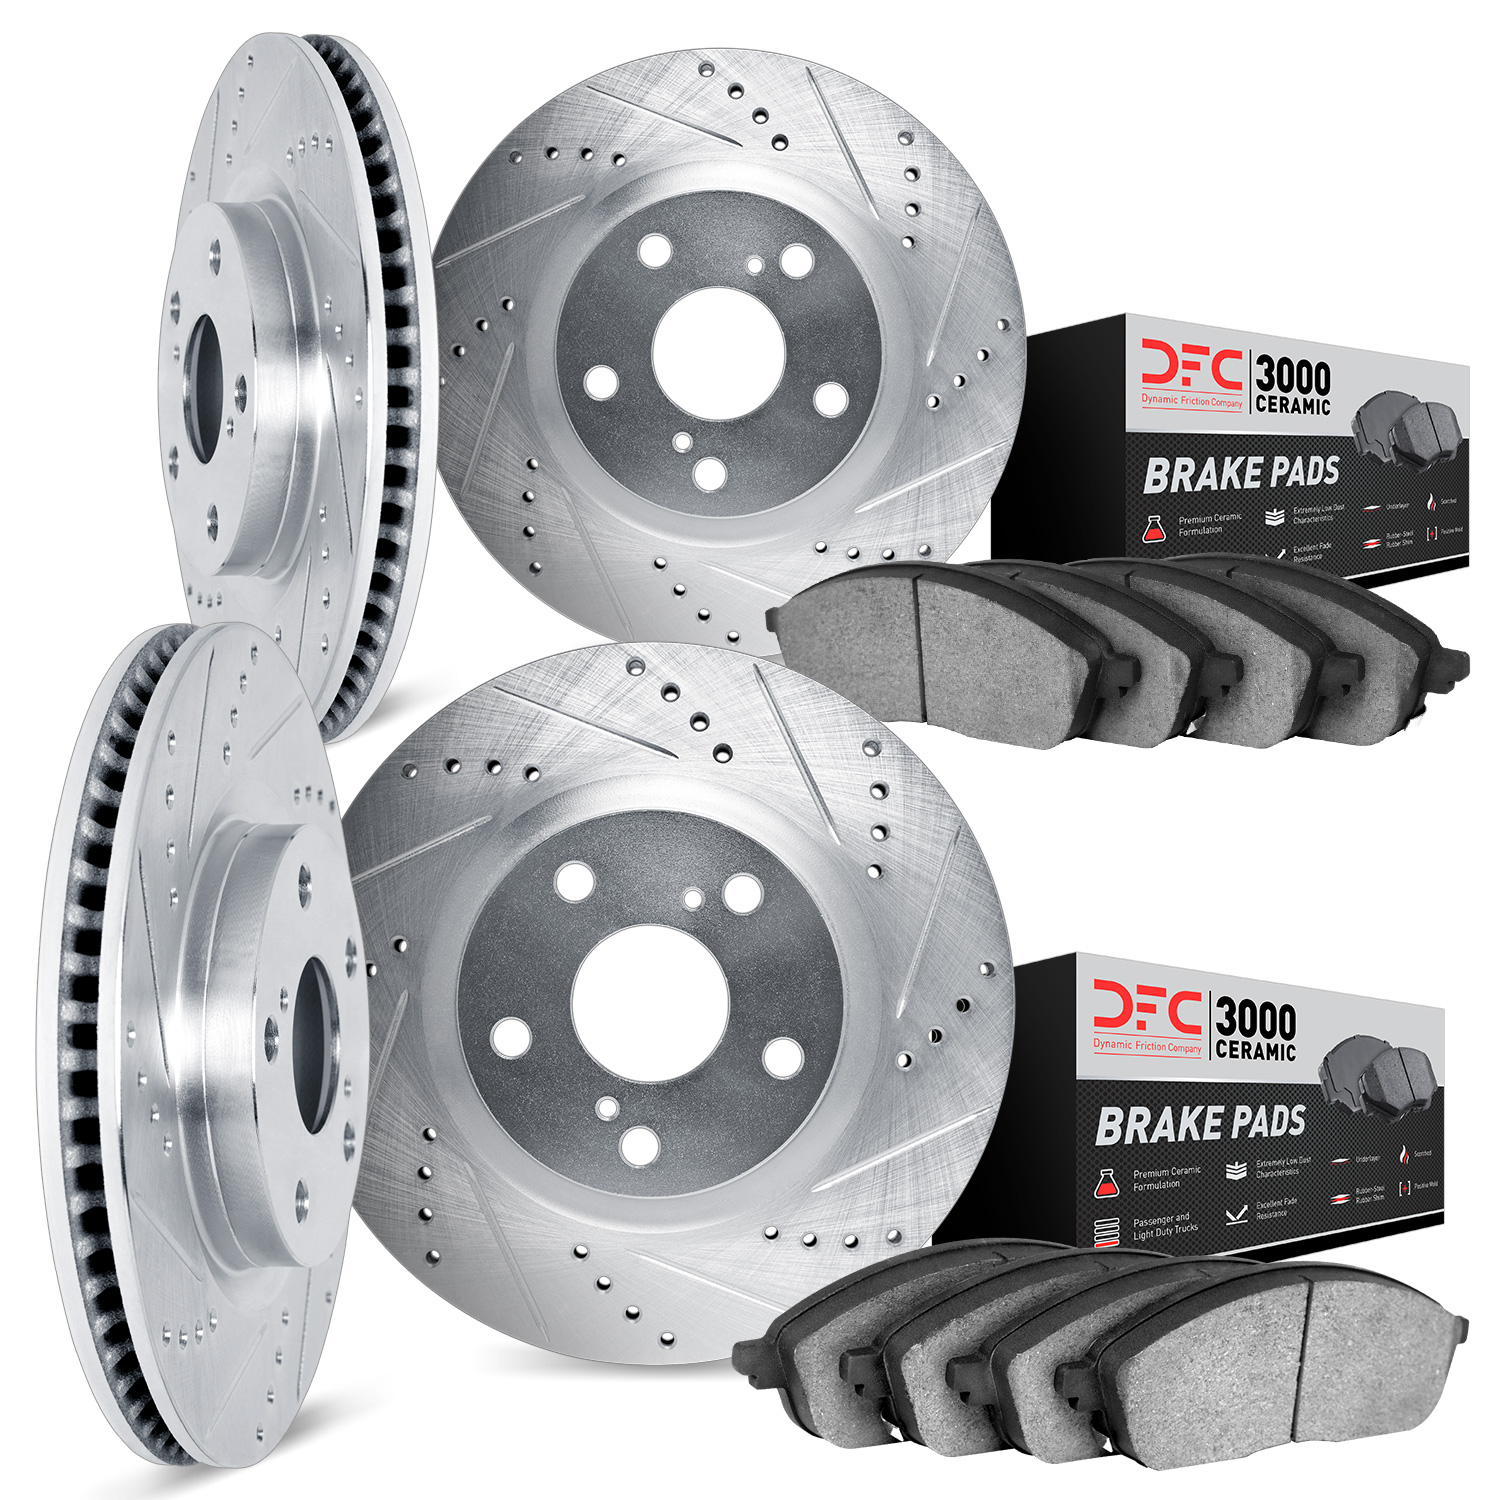 7304-54007 Drilled/Slotted Brake Rotor with 3000-Series Ceramic Brake Pads Kit [Silver], 1994-2004 Ford/Lincoln/Mercury/Mazda, P